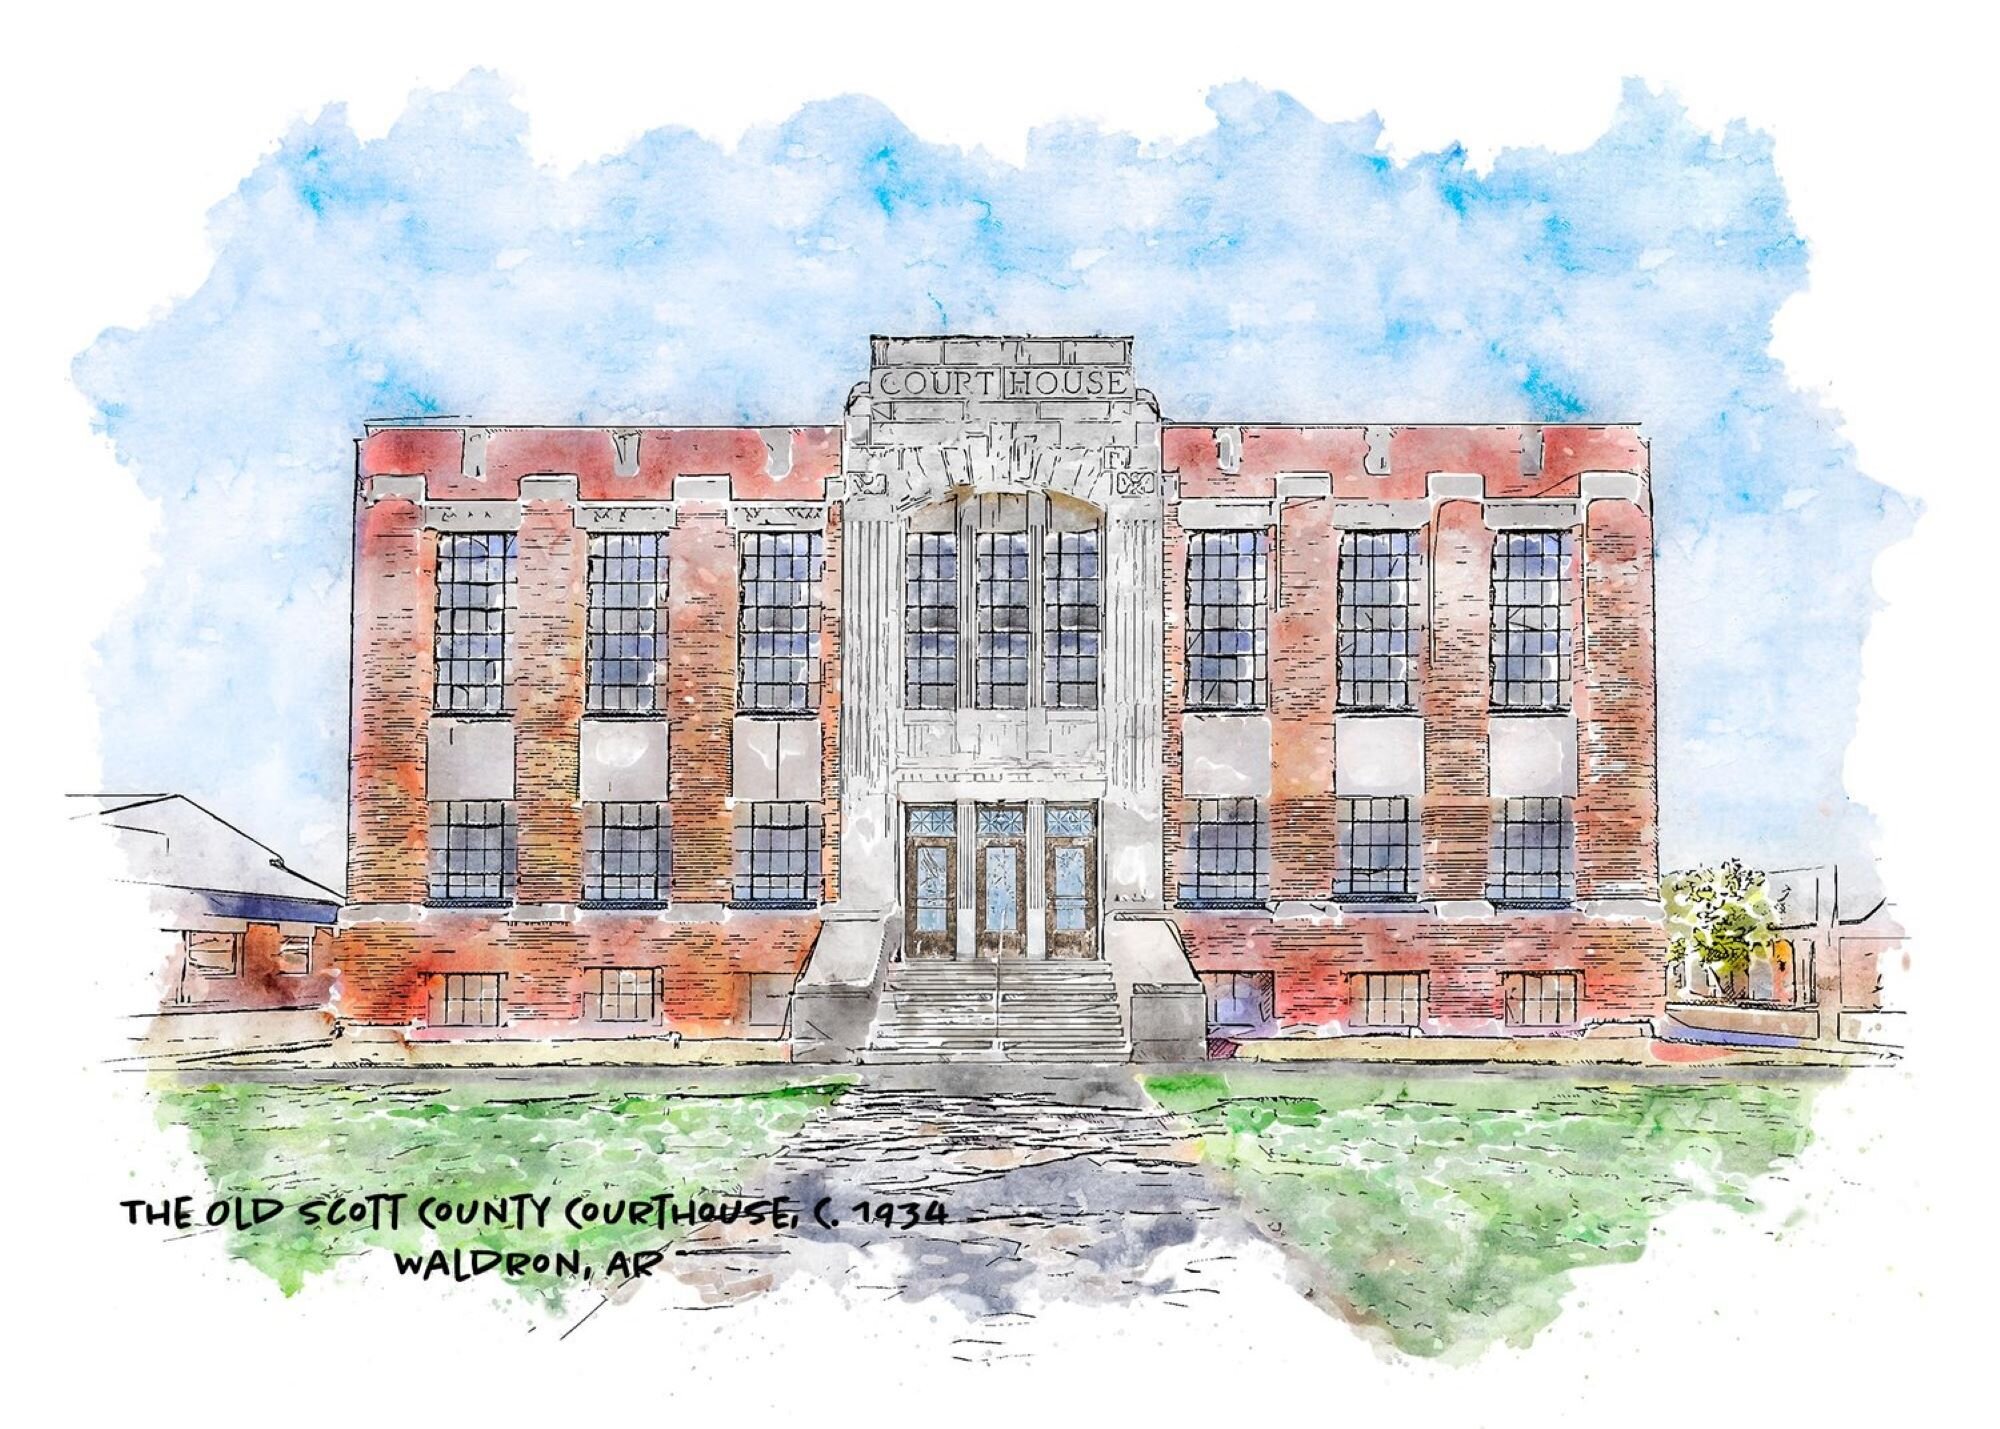 Wow!  We are on a roll!  We Just added 26th #historic #Arkansas #Courthouses, the old Scott County Courthouse in Waldron, Arkansas.  It was built in 1934 as a New Deal/WPA project and the courthouse served the county until 1996 when the county govern